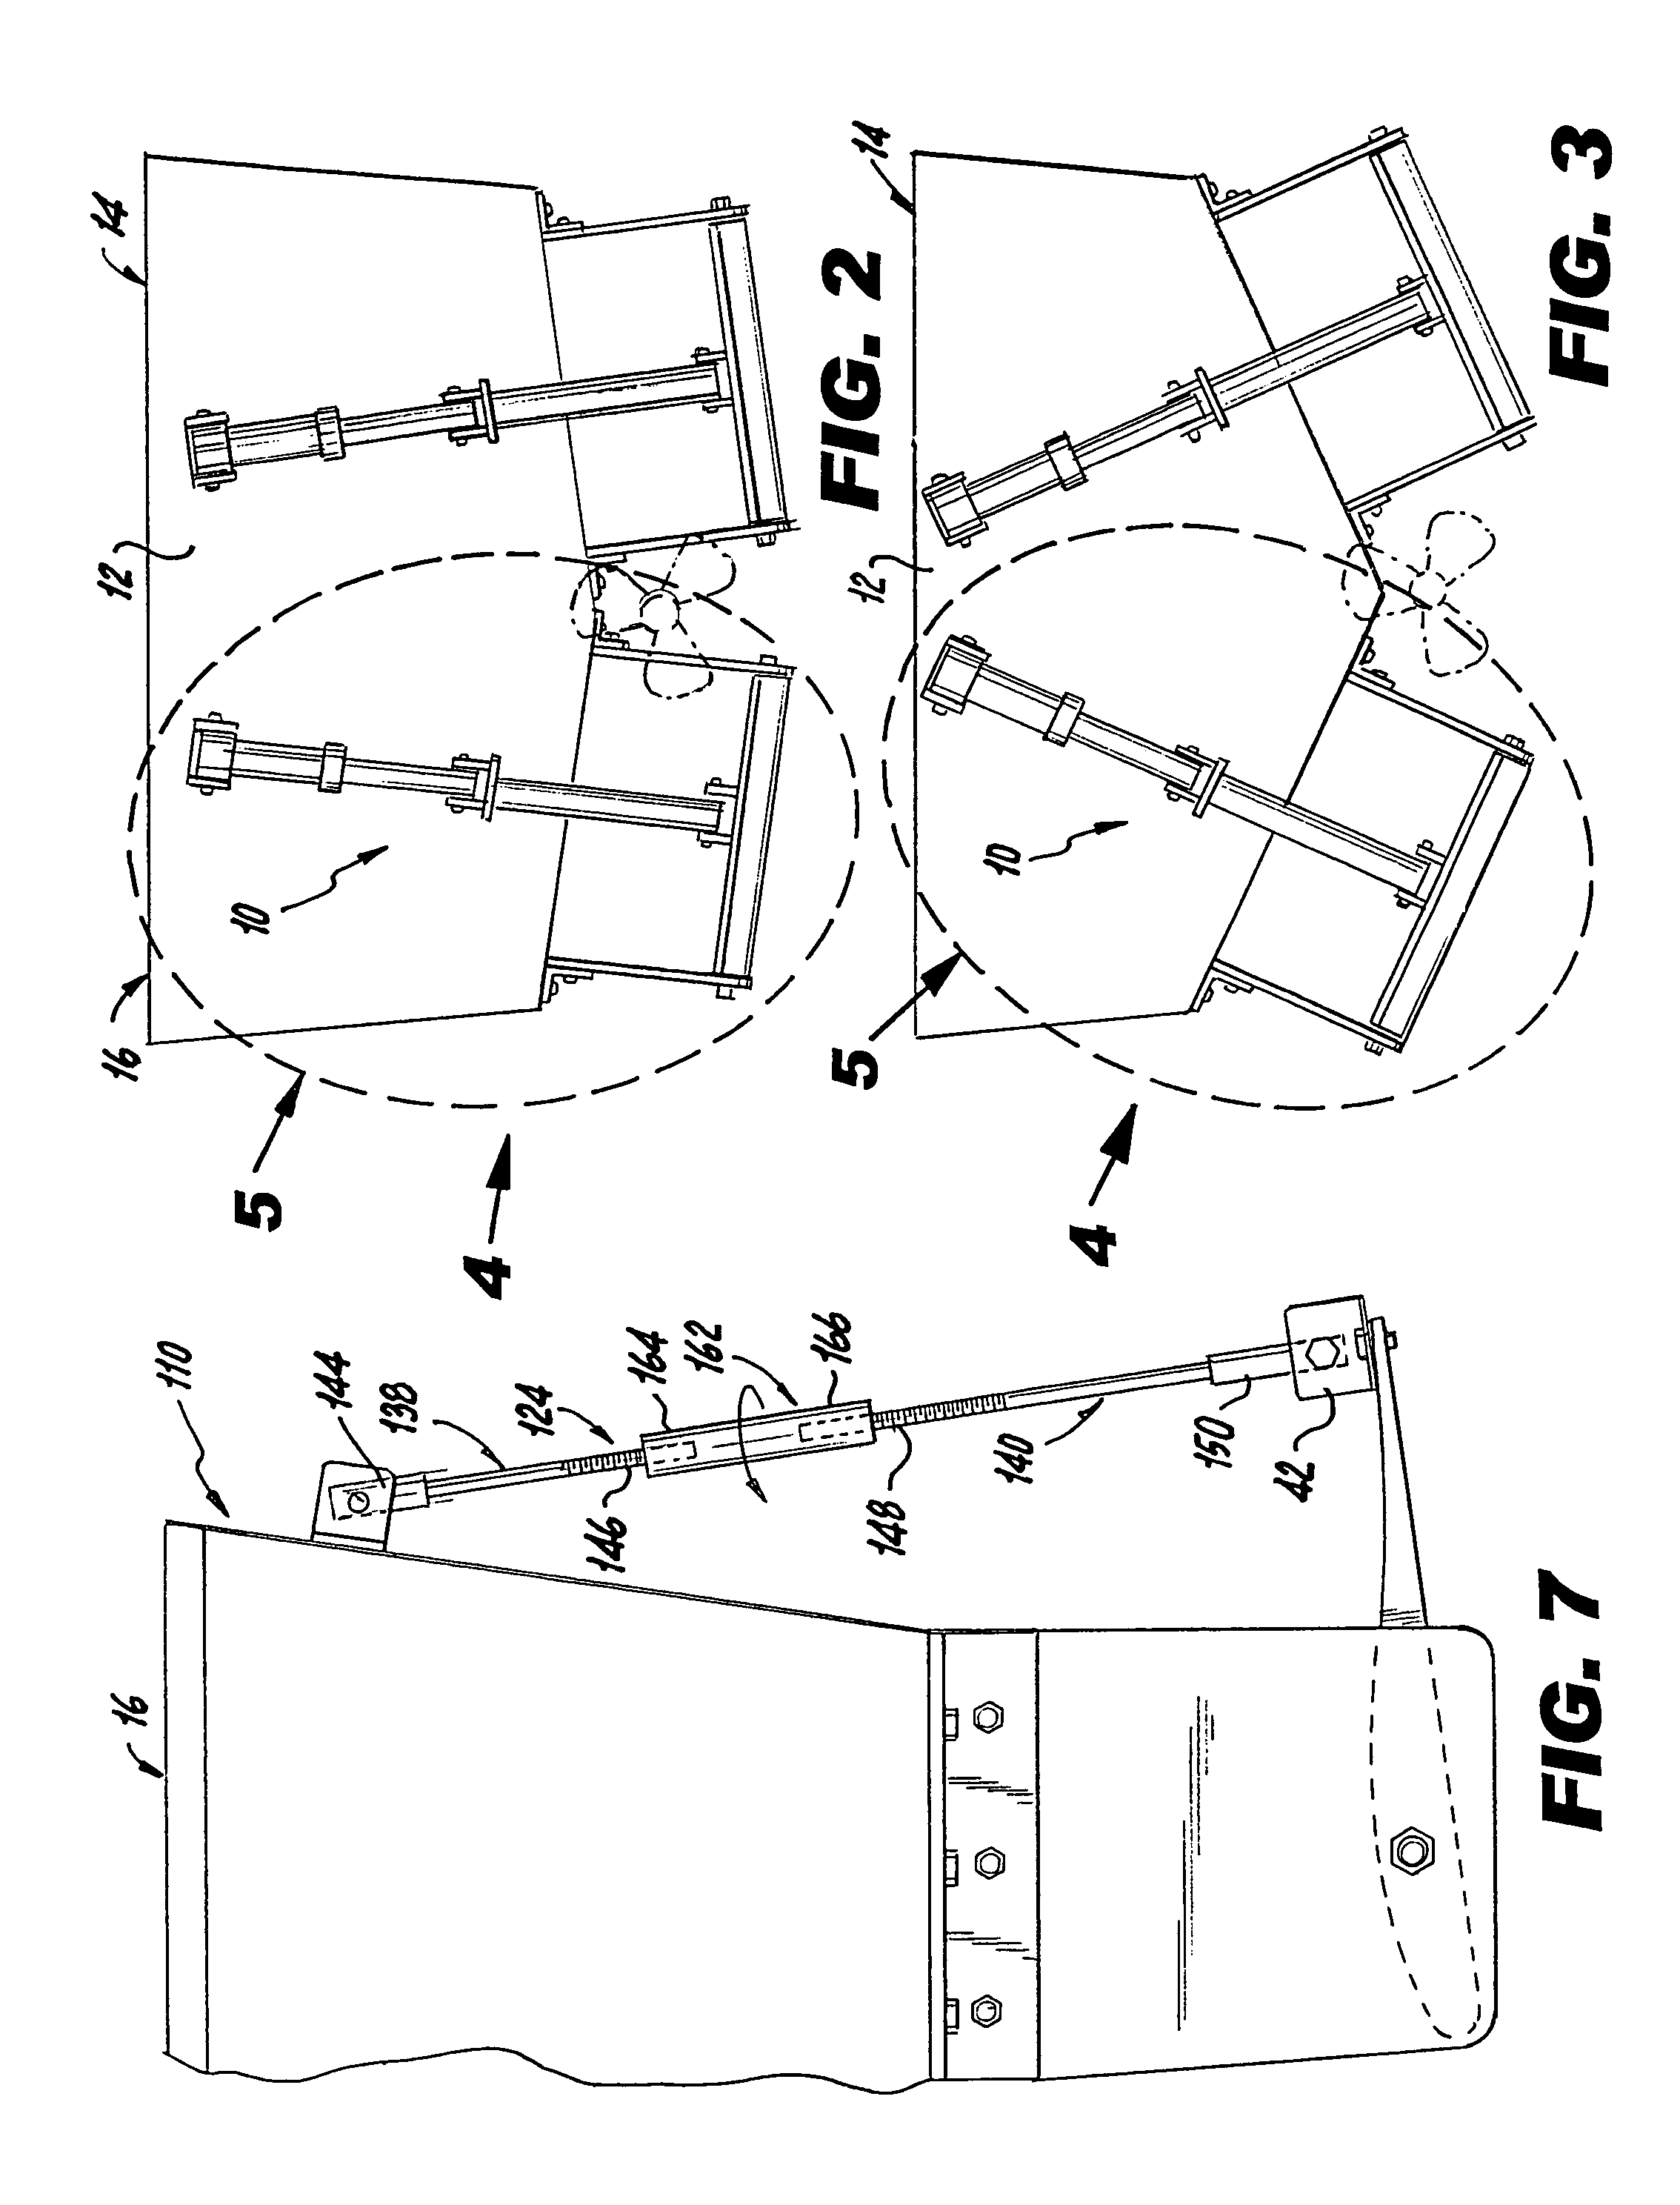 Hydrofoil unit for attaching to the stern of the hull of a boat